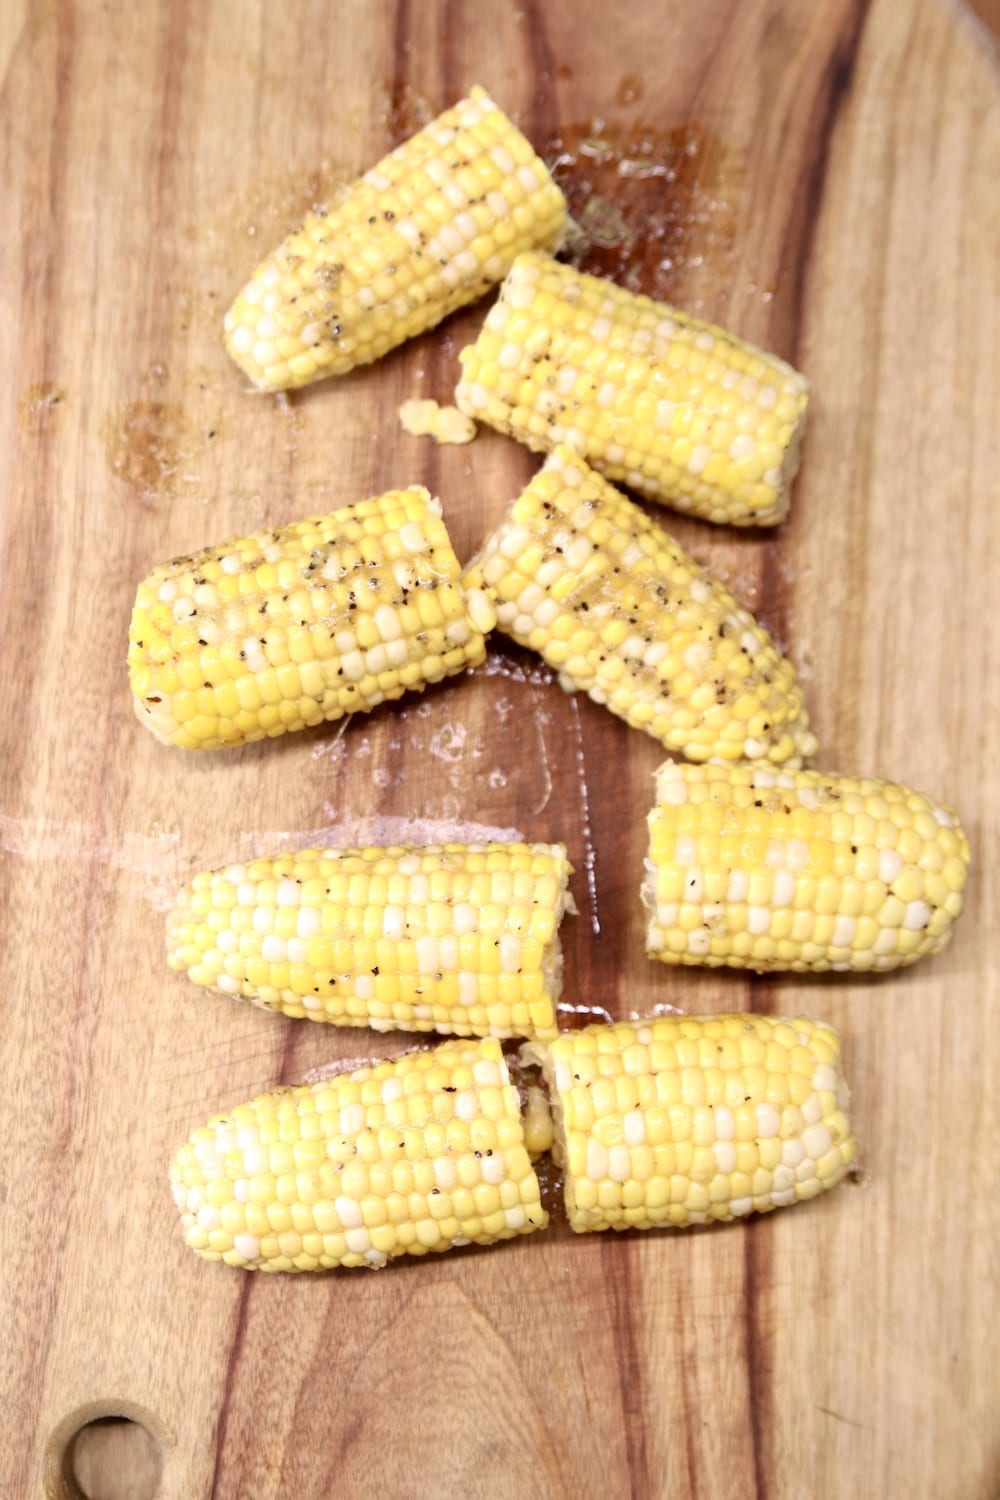 Grilled corn on the cob, on a cutting board - sliced in half